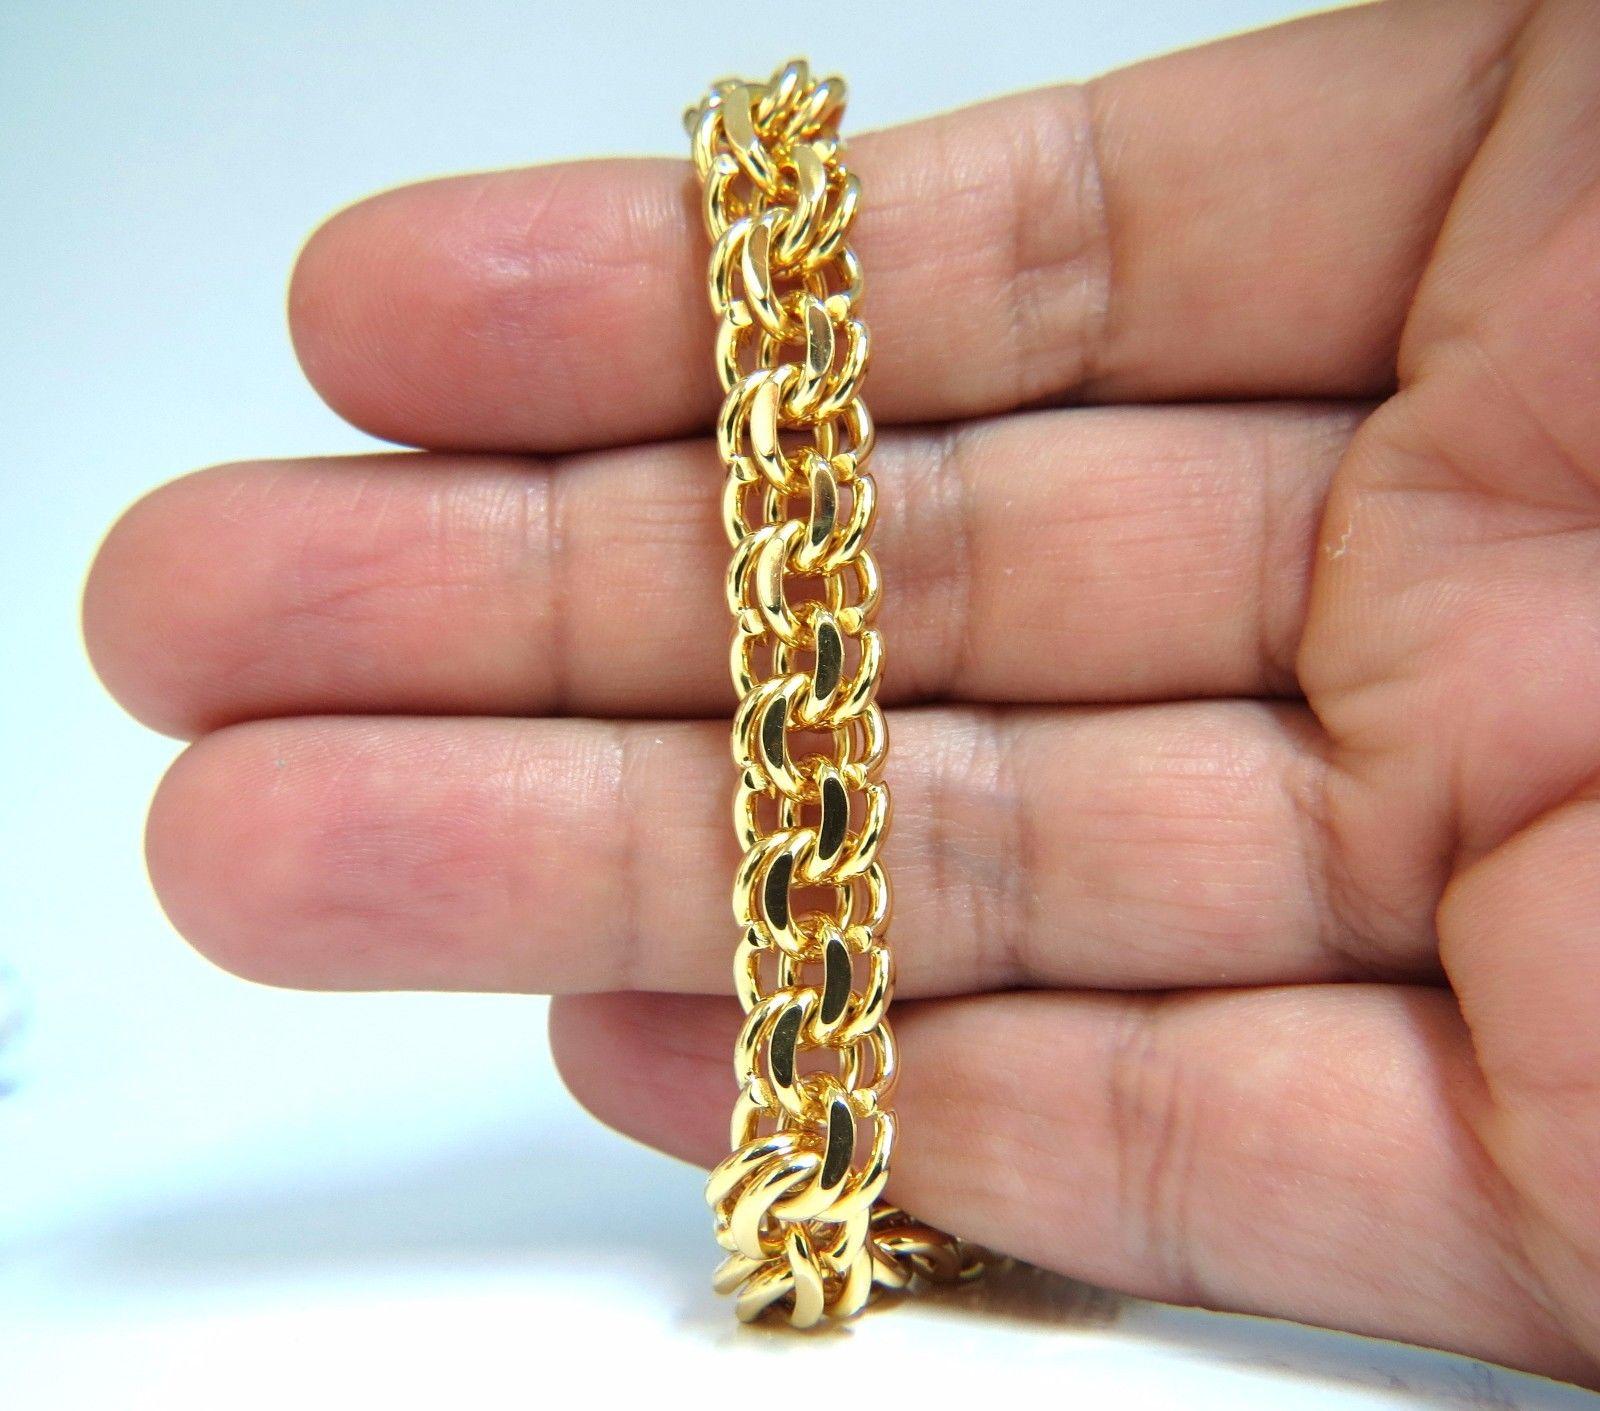 Solid, Durable chain Link Charm Bracelet

Smooth & High Shine

7 inch / wearable length

38.3 Grams.

9.4mm wide links

14kt yellow Gold.

Secure & Comfortable clasp